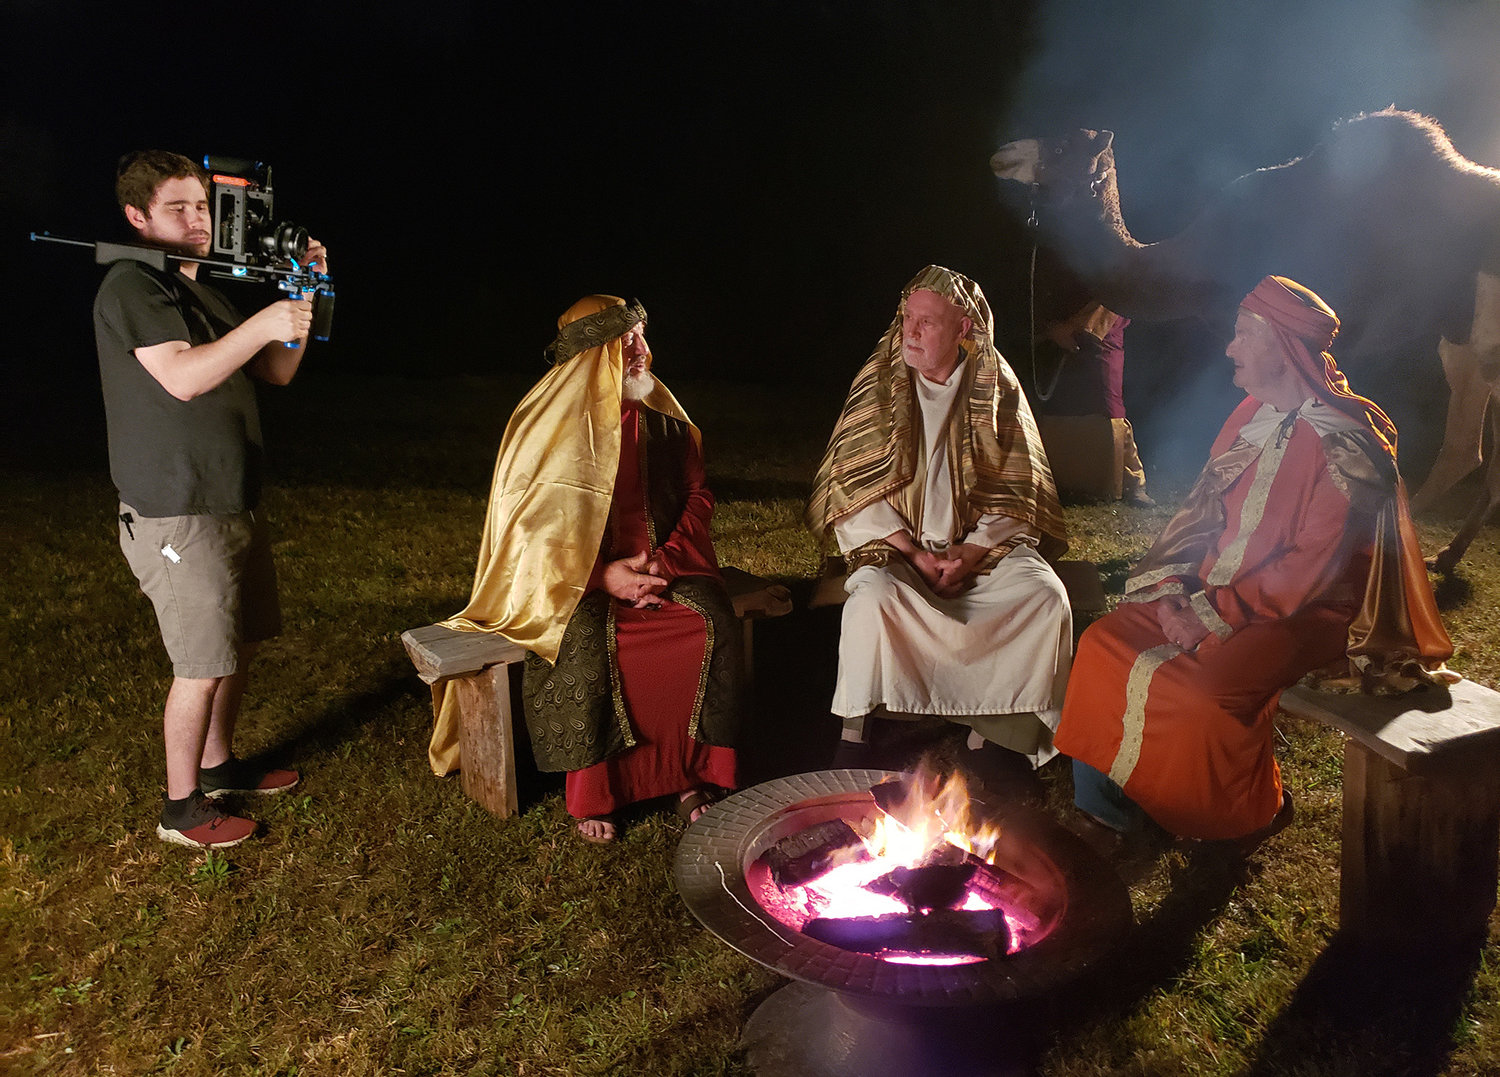 Members of Legacy Baptist Church play the roles of the wise men during filming of the Legacy of Bethlehem production in 2020 at Legacy Baptist Church in Dallas, Ga. (Photo/Courtesy Jim Yearwood)